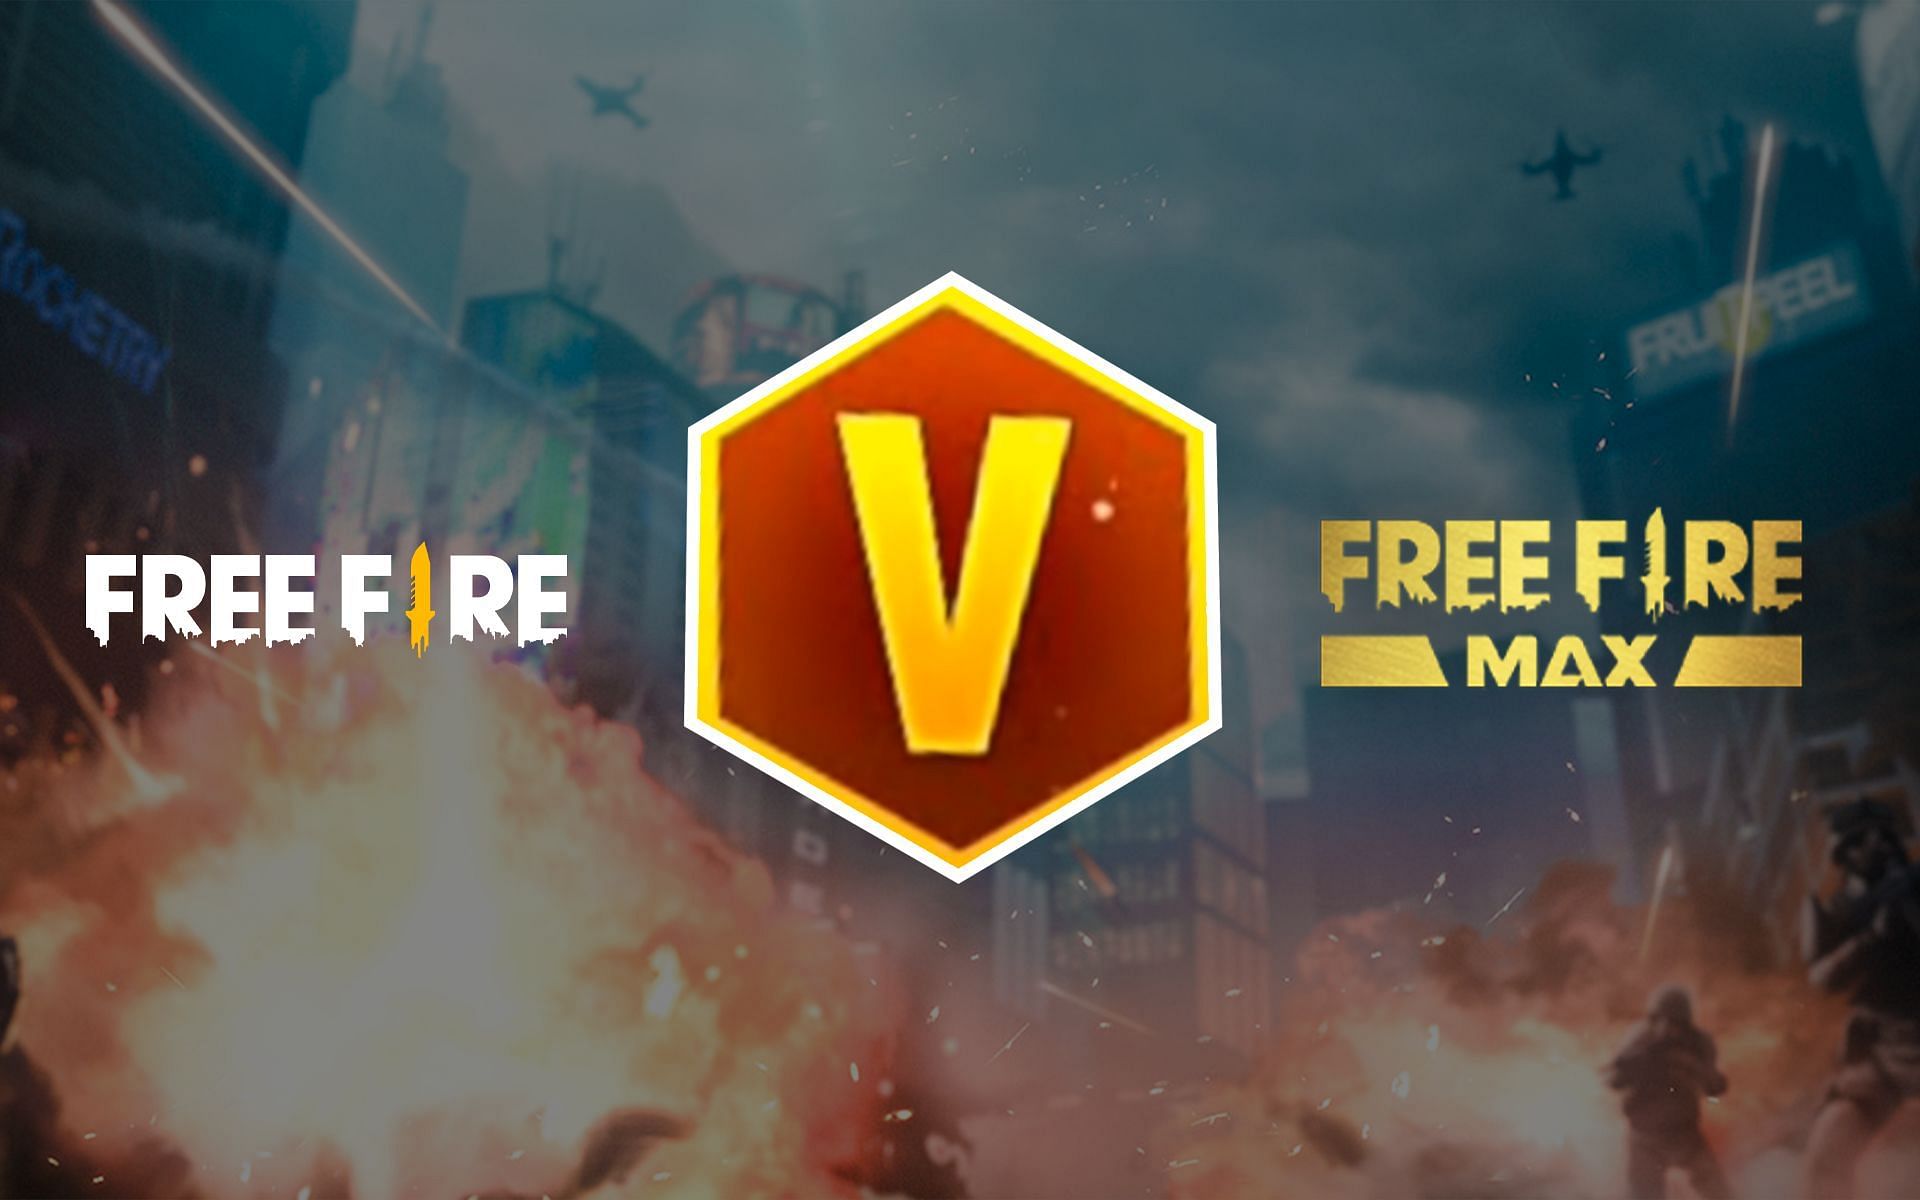 V badge is given to official Free Fire and Free Fire MAX partners (Image via Sportskeeda)